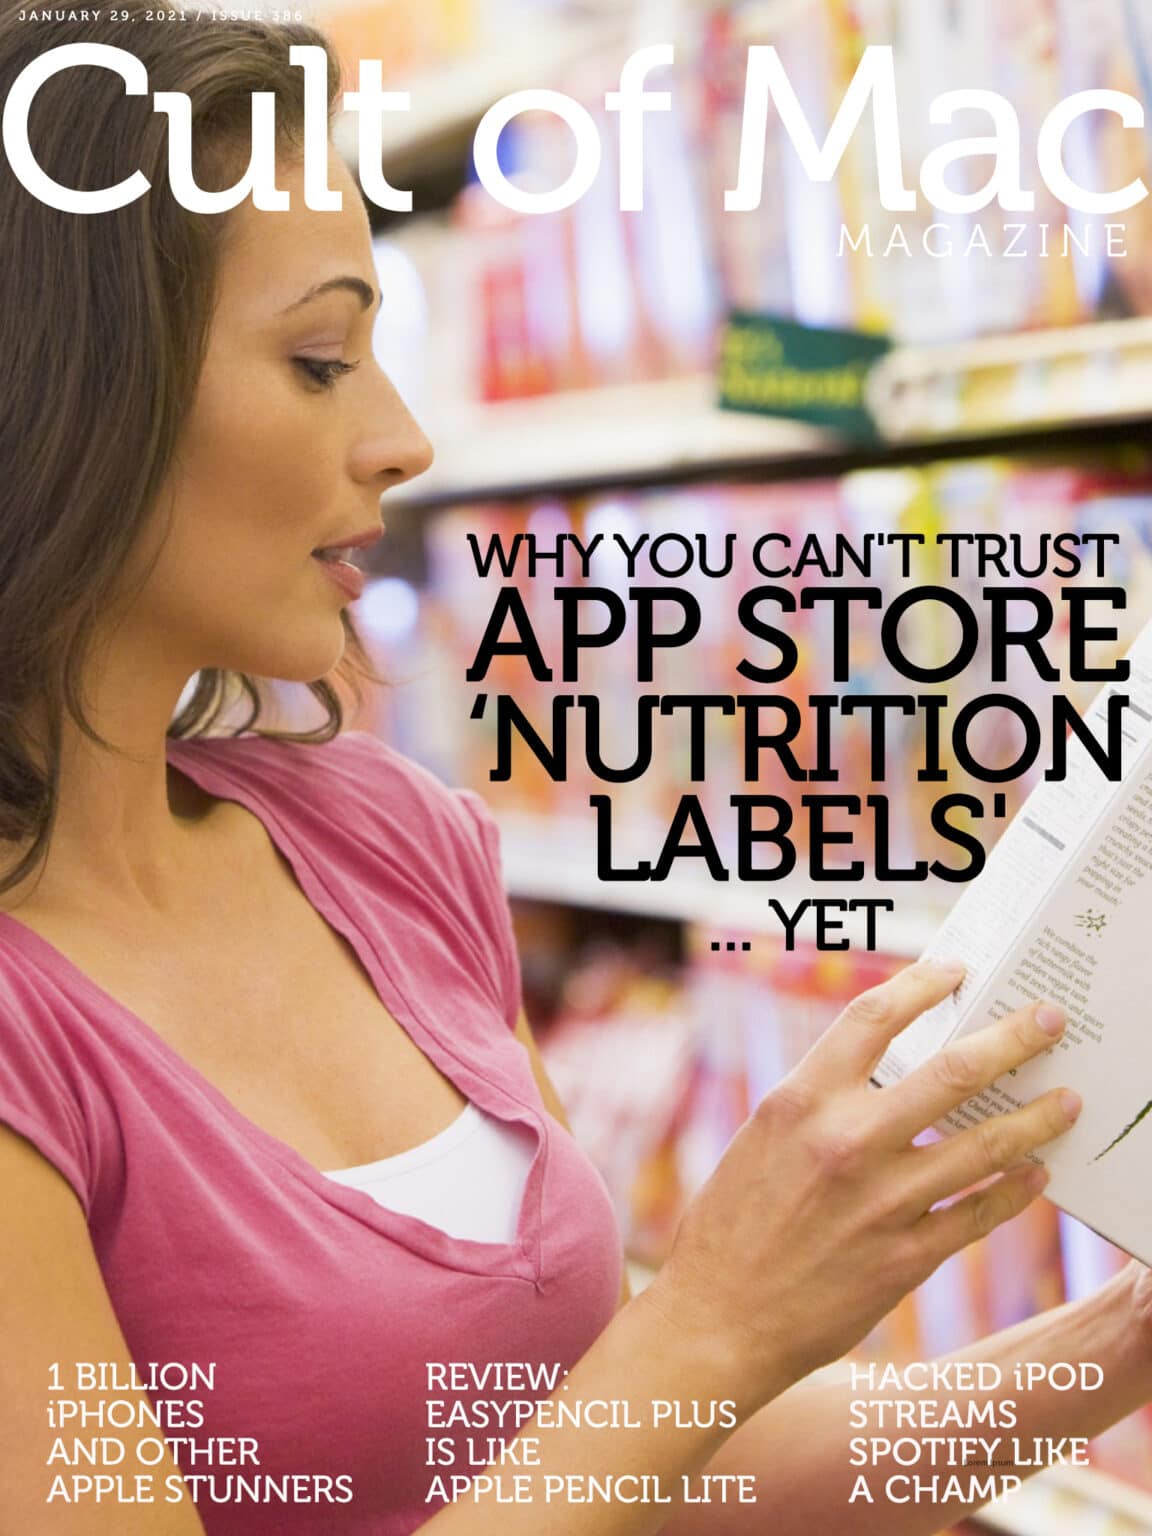 App Store nutrition labels: You can't trust everything you read.